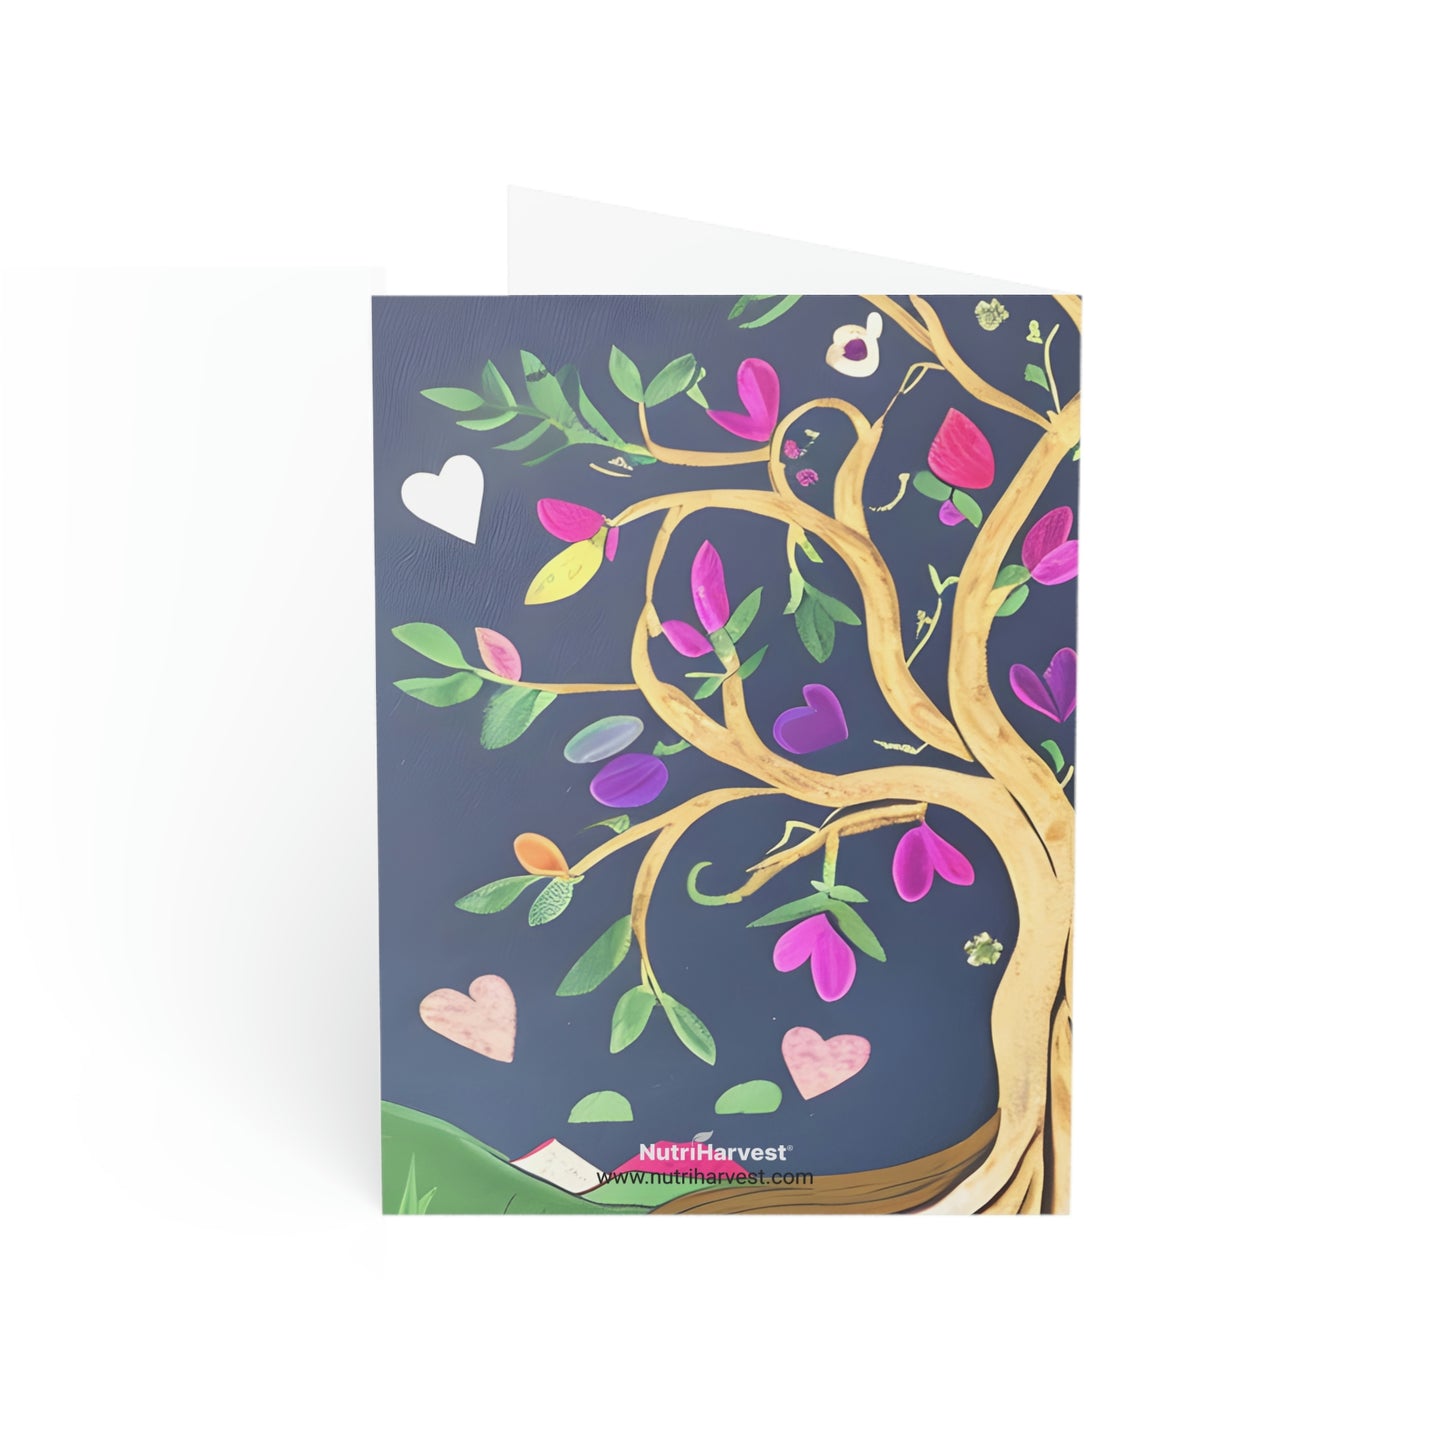 Beautiful Tree Heart Flowers Art Folded Sustainable Greeting Cards (1, 10, 30, or 50pcs)